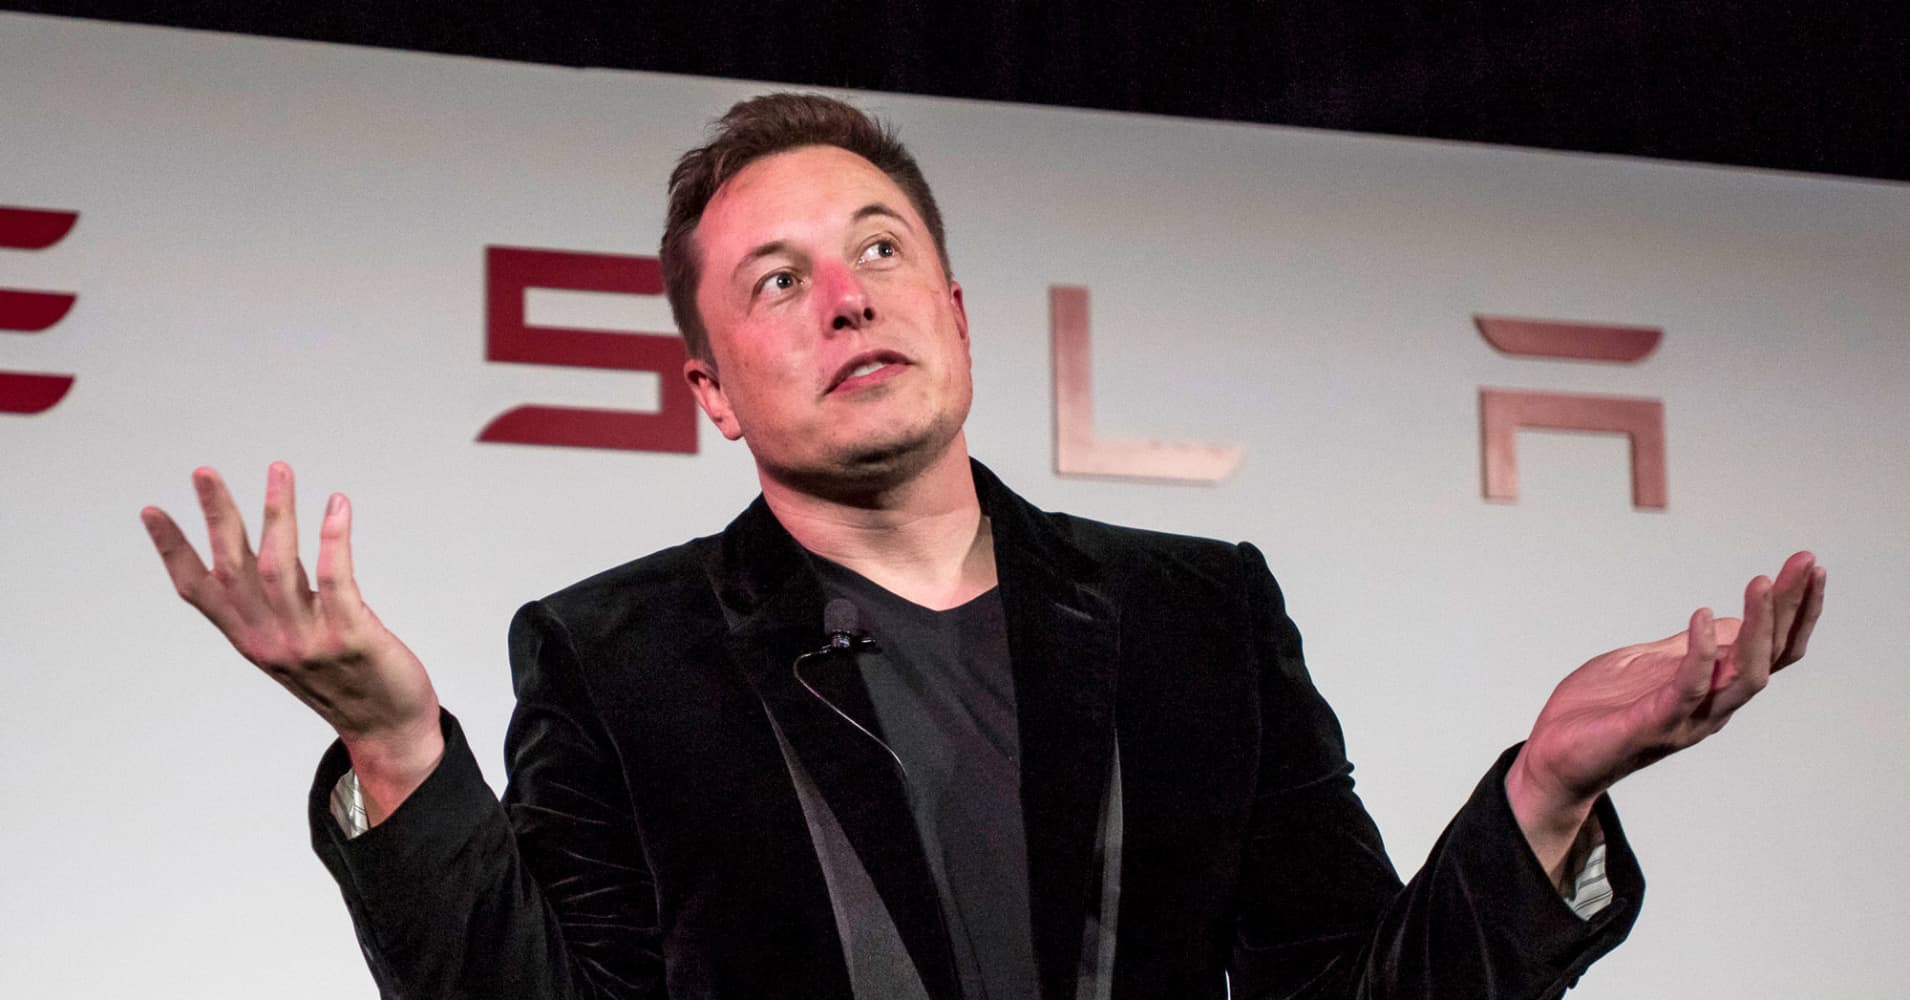 Elon Musk, chairman and chief executive officer of Tesla Motors